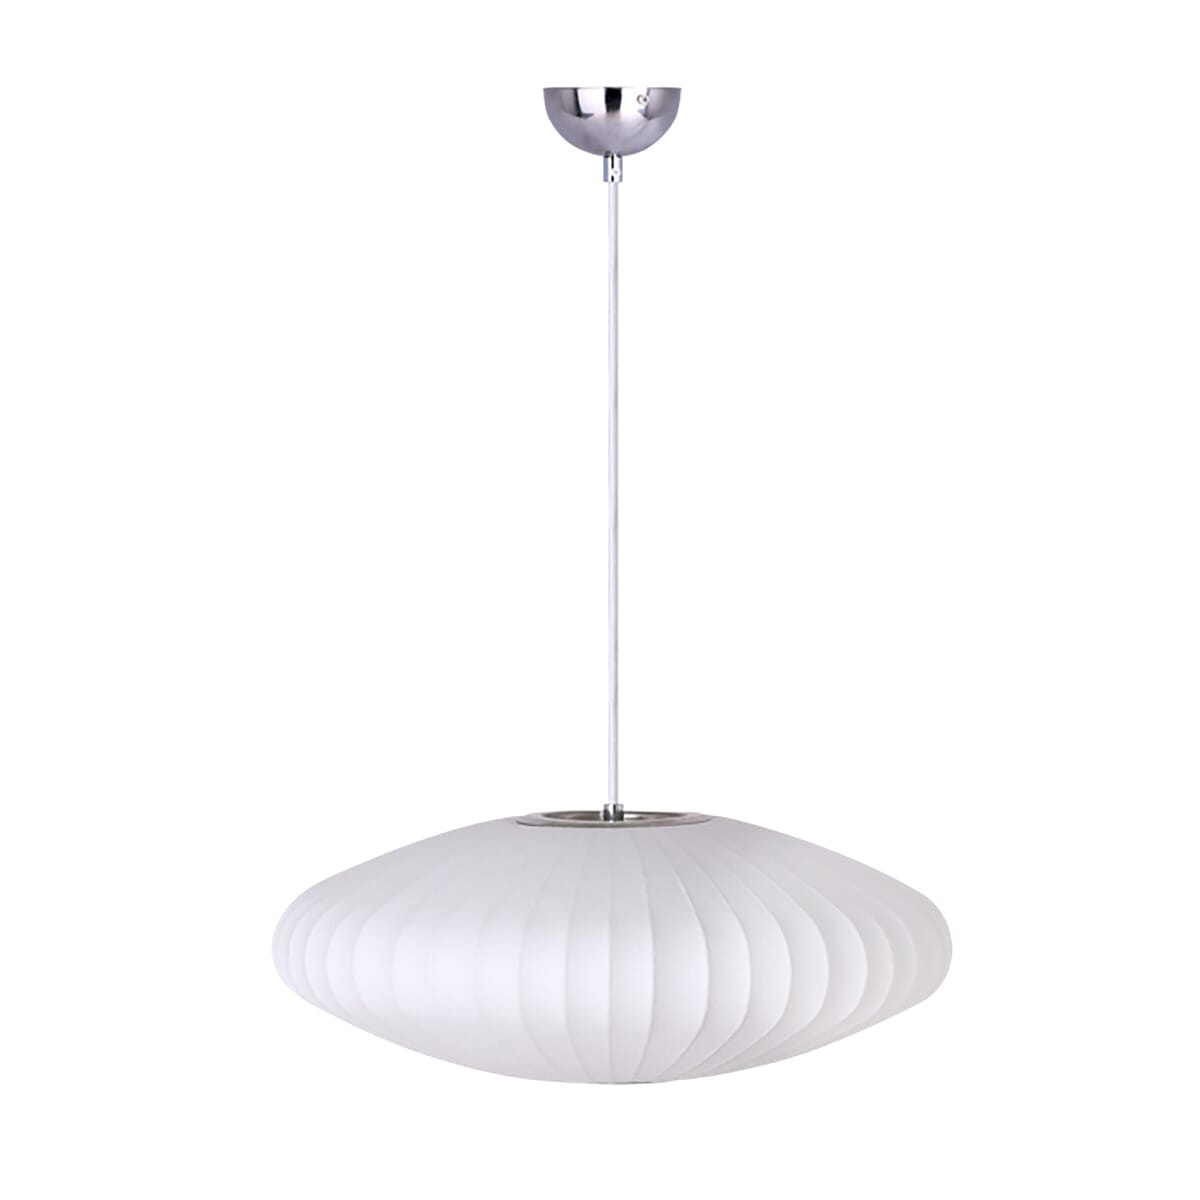 Custodio enlace gato Buy George Nelson Bubble Lamp| Shop the Saucer Lamp at Swivel UK